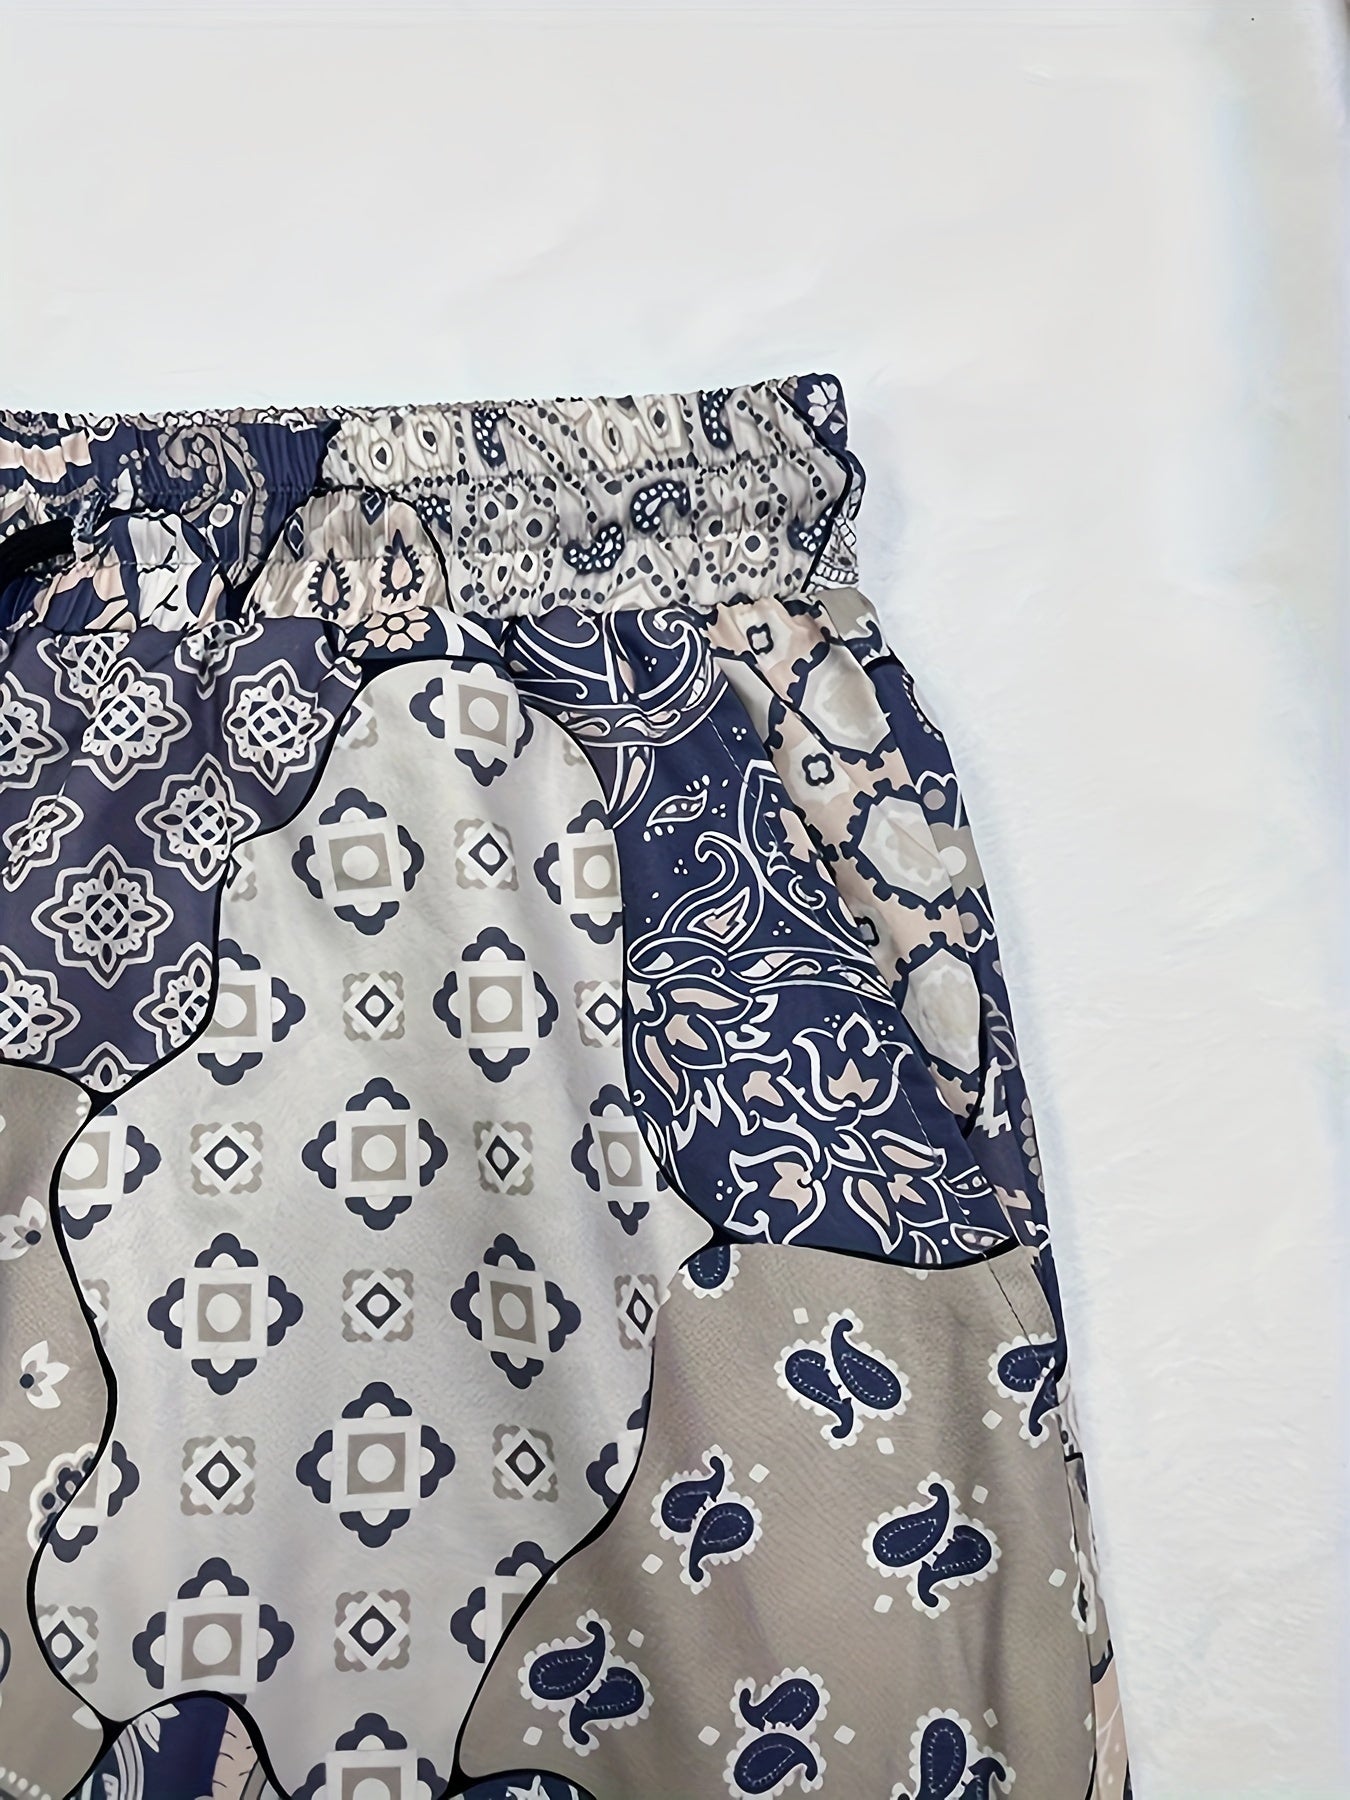 Vintage Geometric Shorts - Perfect for Summer Vacation